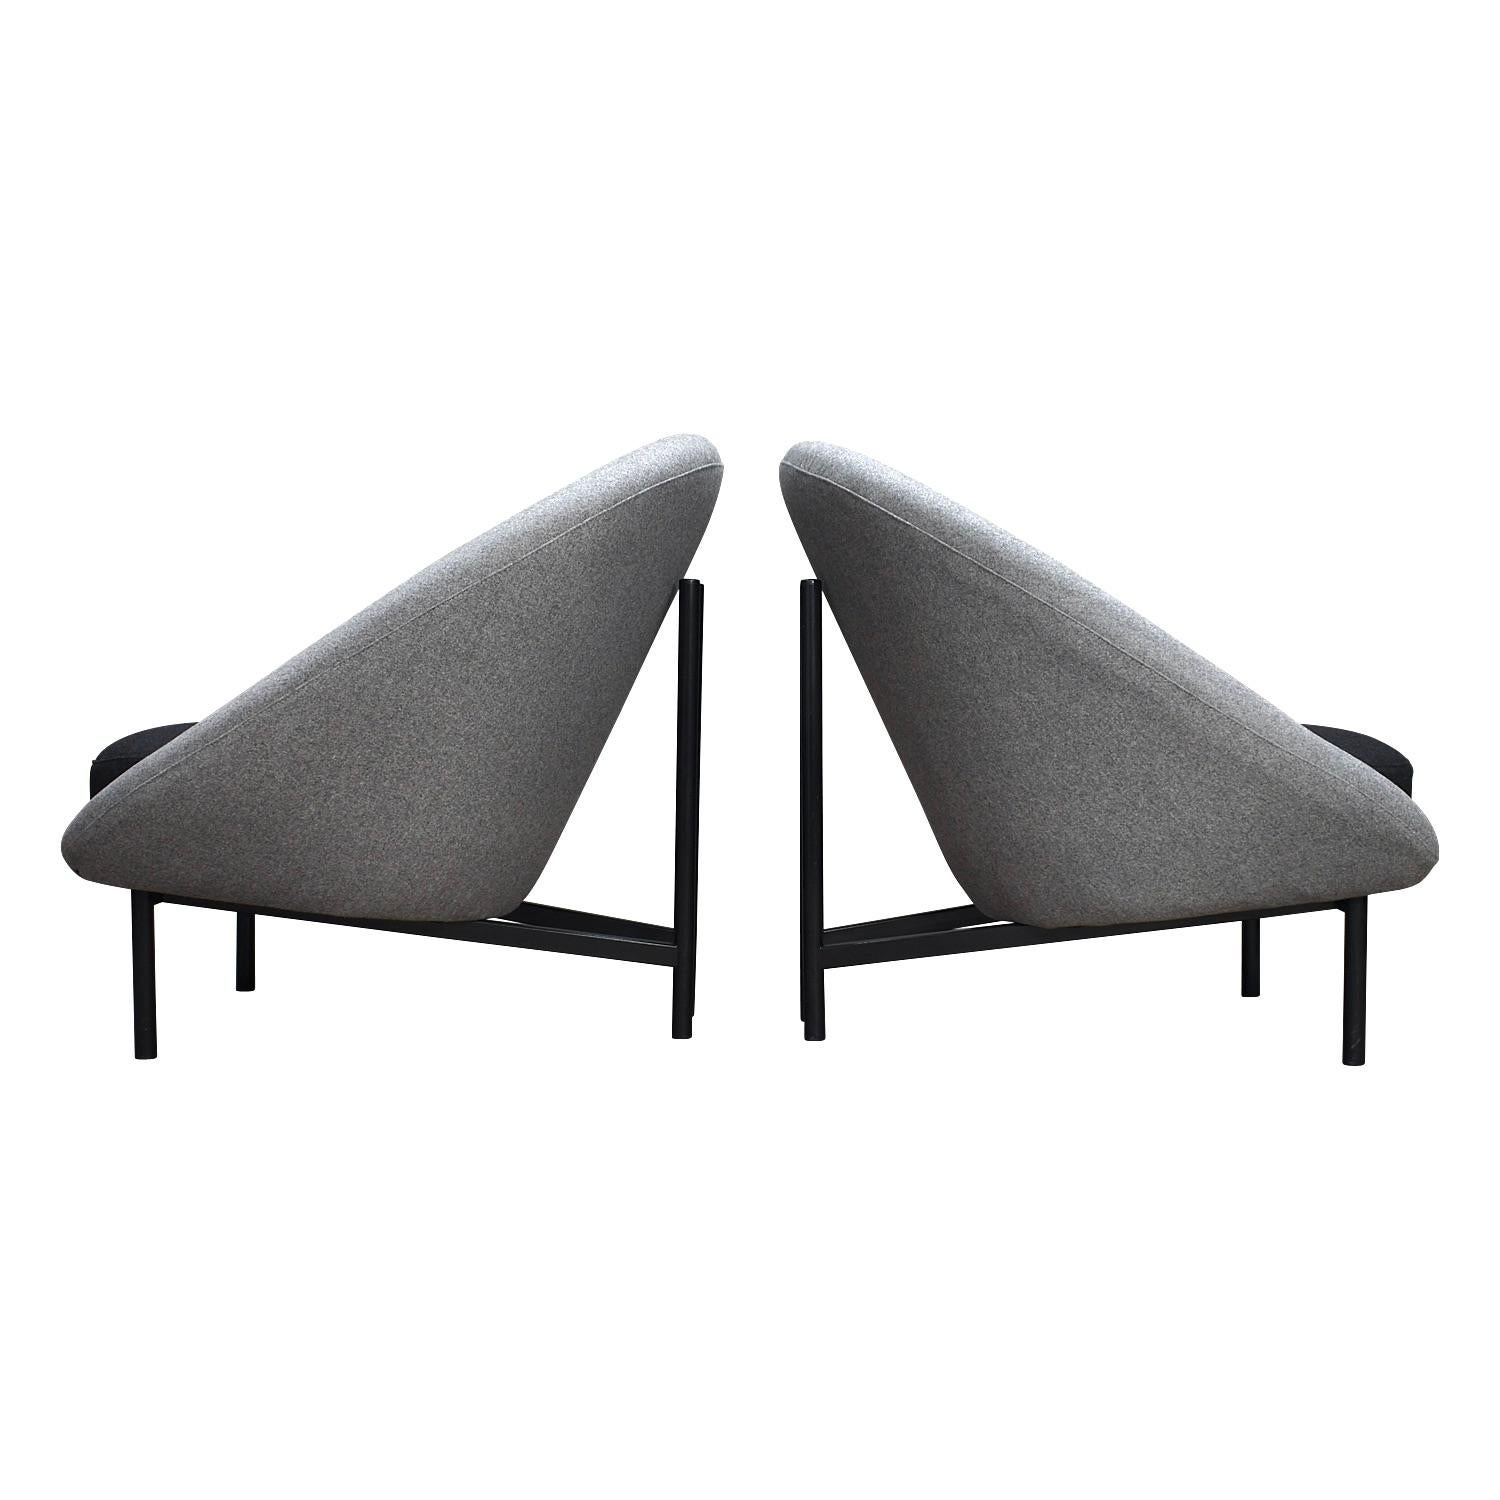 Pair of f115 armchairs by Theo Ruth for Artifort, Netherlands, 1958.
These are rare pieces; amazing and sophisticated center-pieces.
We also have a sofa available.

The chairs are new upholstered in a high quality felt wool fabric with new foam